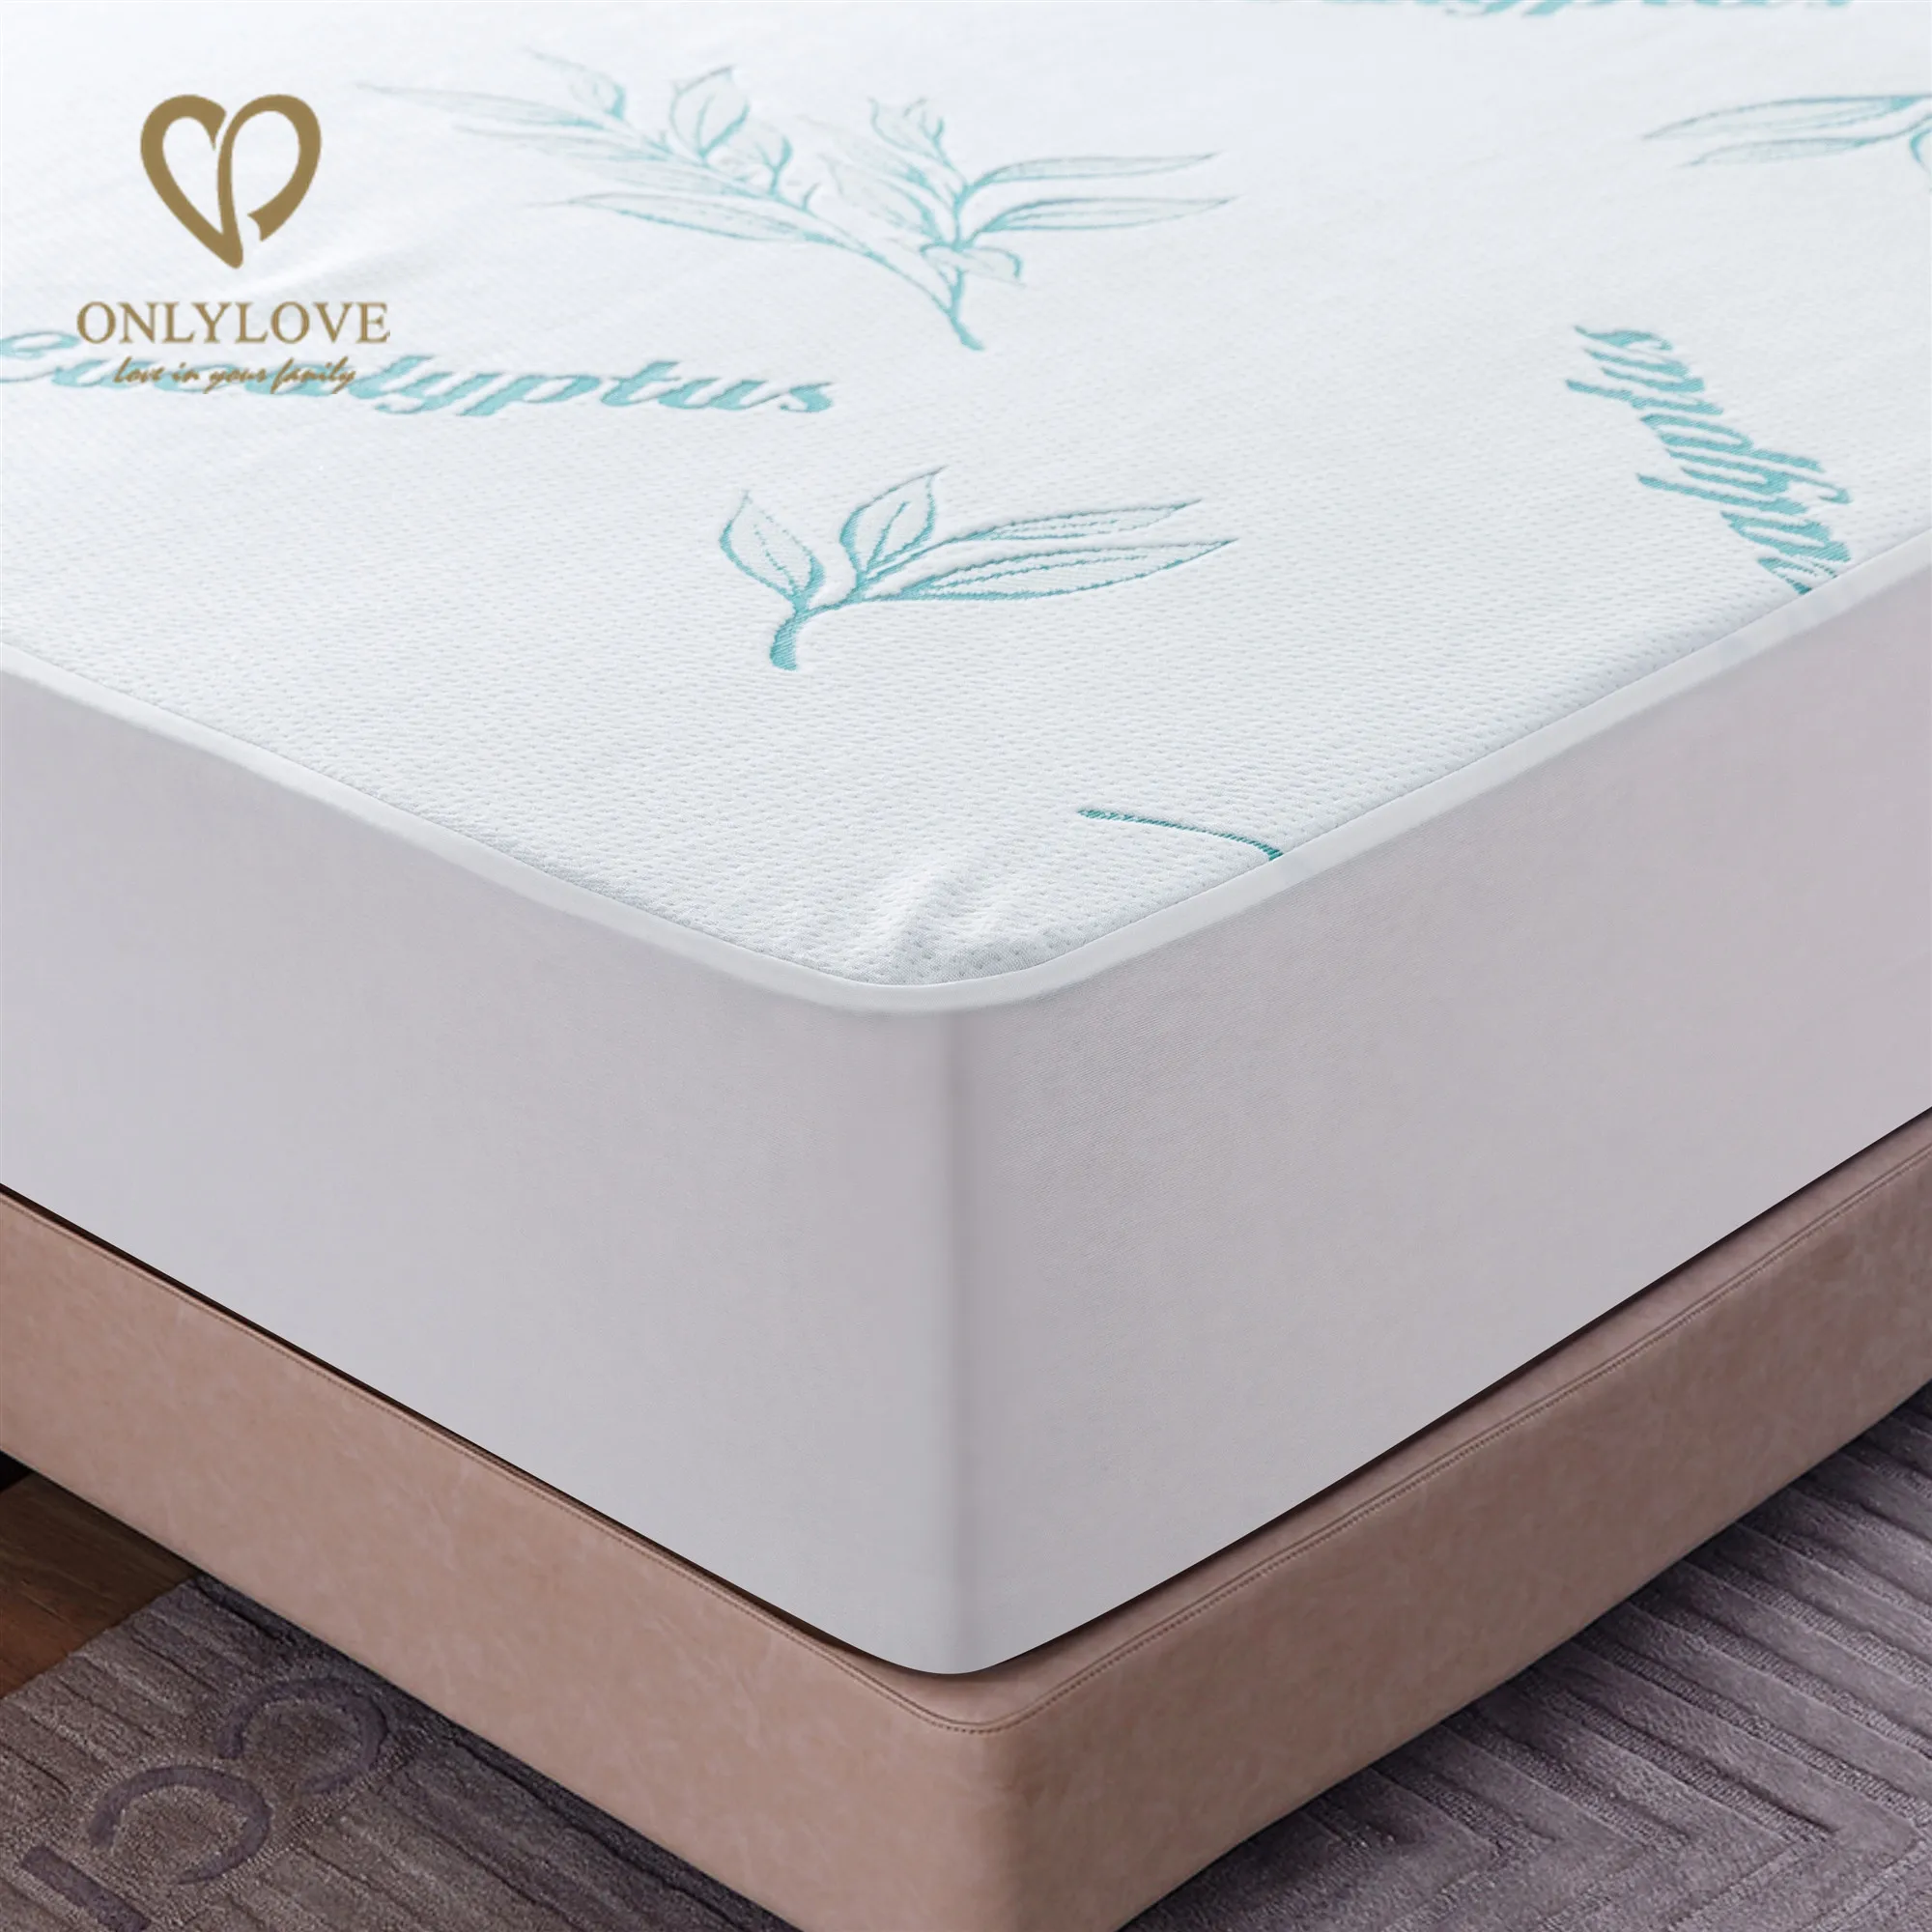 
Queen Size Premium Hypoallergenic Eucalyptus Scented quilted Mattress Pad - Top with TPU Waterproofing, china factory 